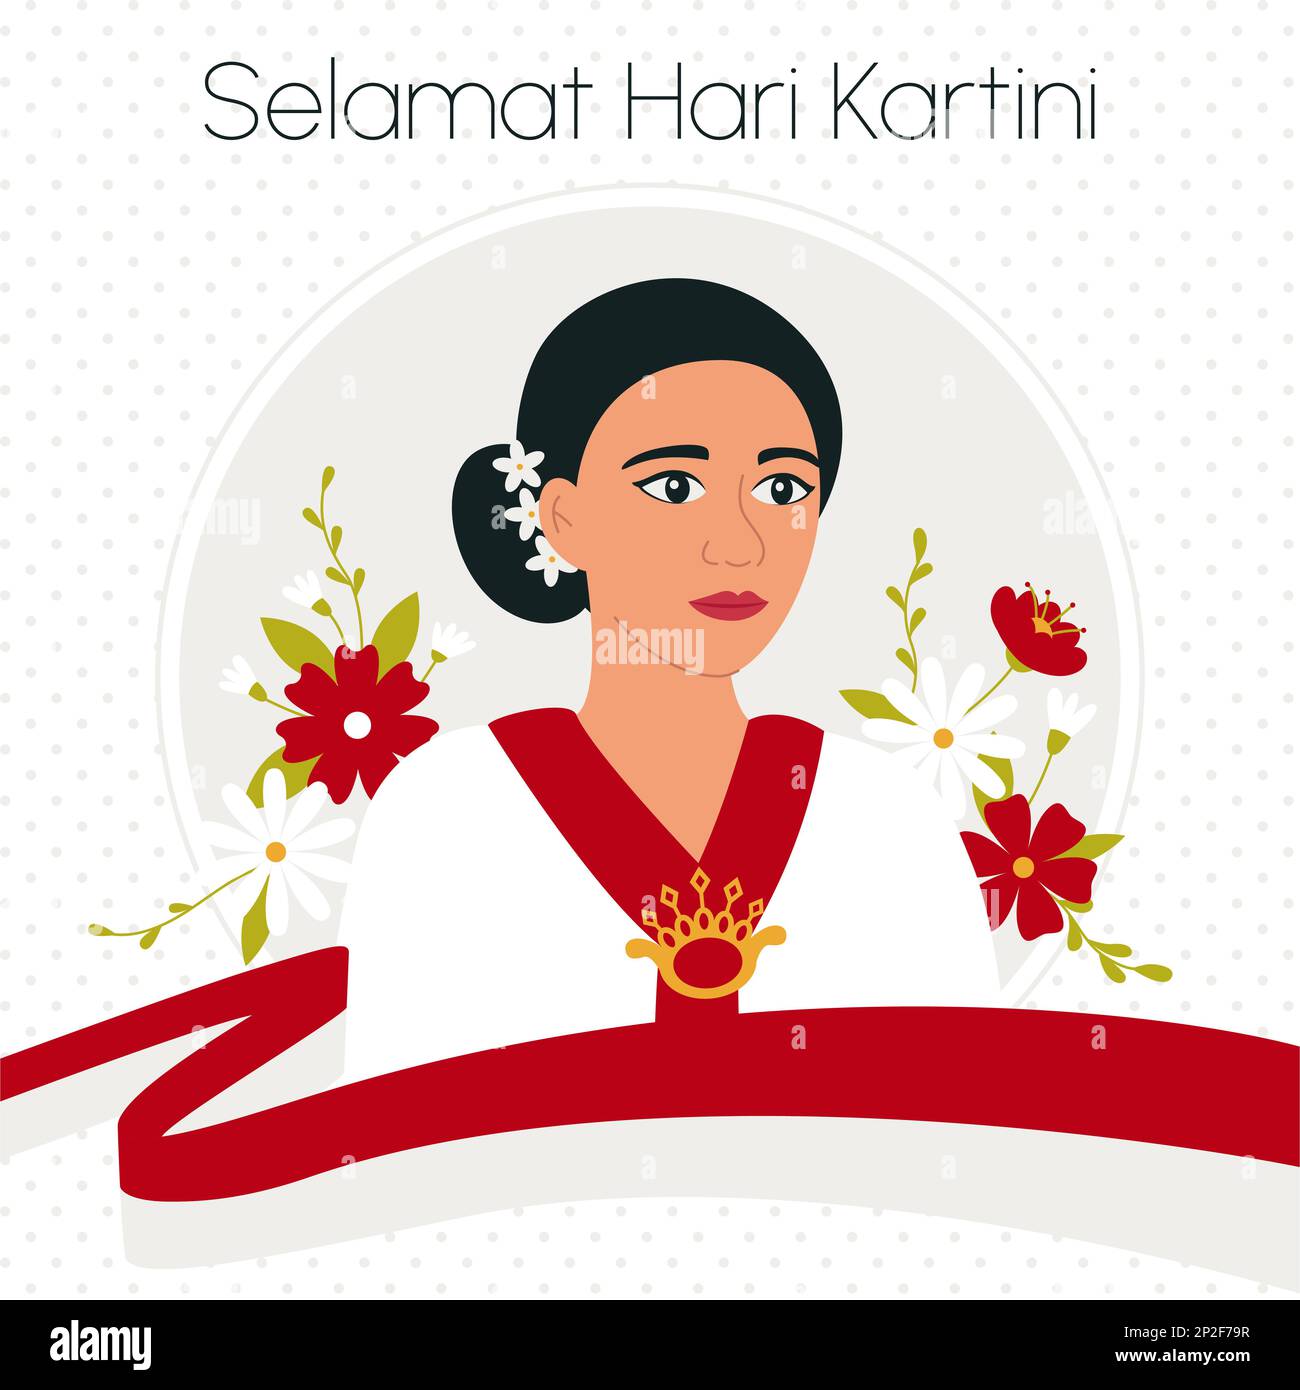 Raden Adjeng Kartini the hero of women and human right in Indonesia. Selamat Hari Kartini Means Happy Kartini Day. Asian woman surrounded with flowers Stock Vector